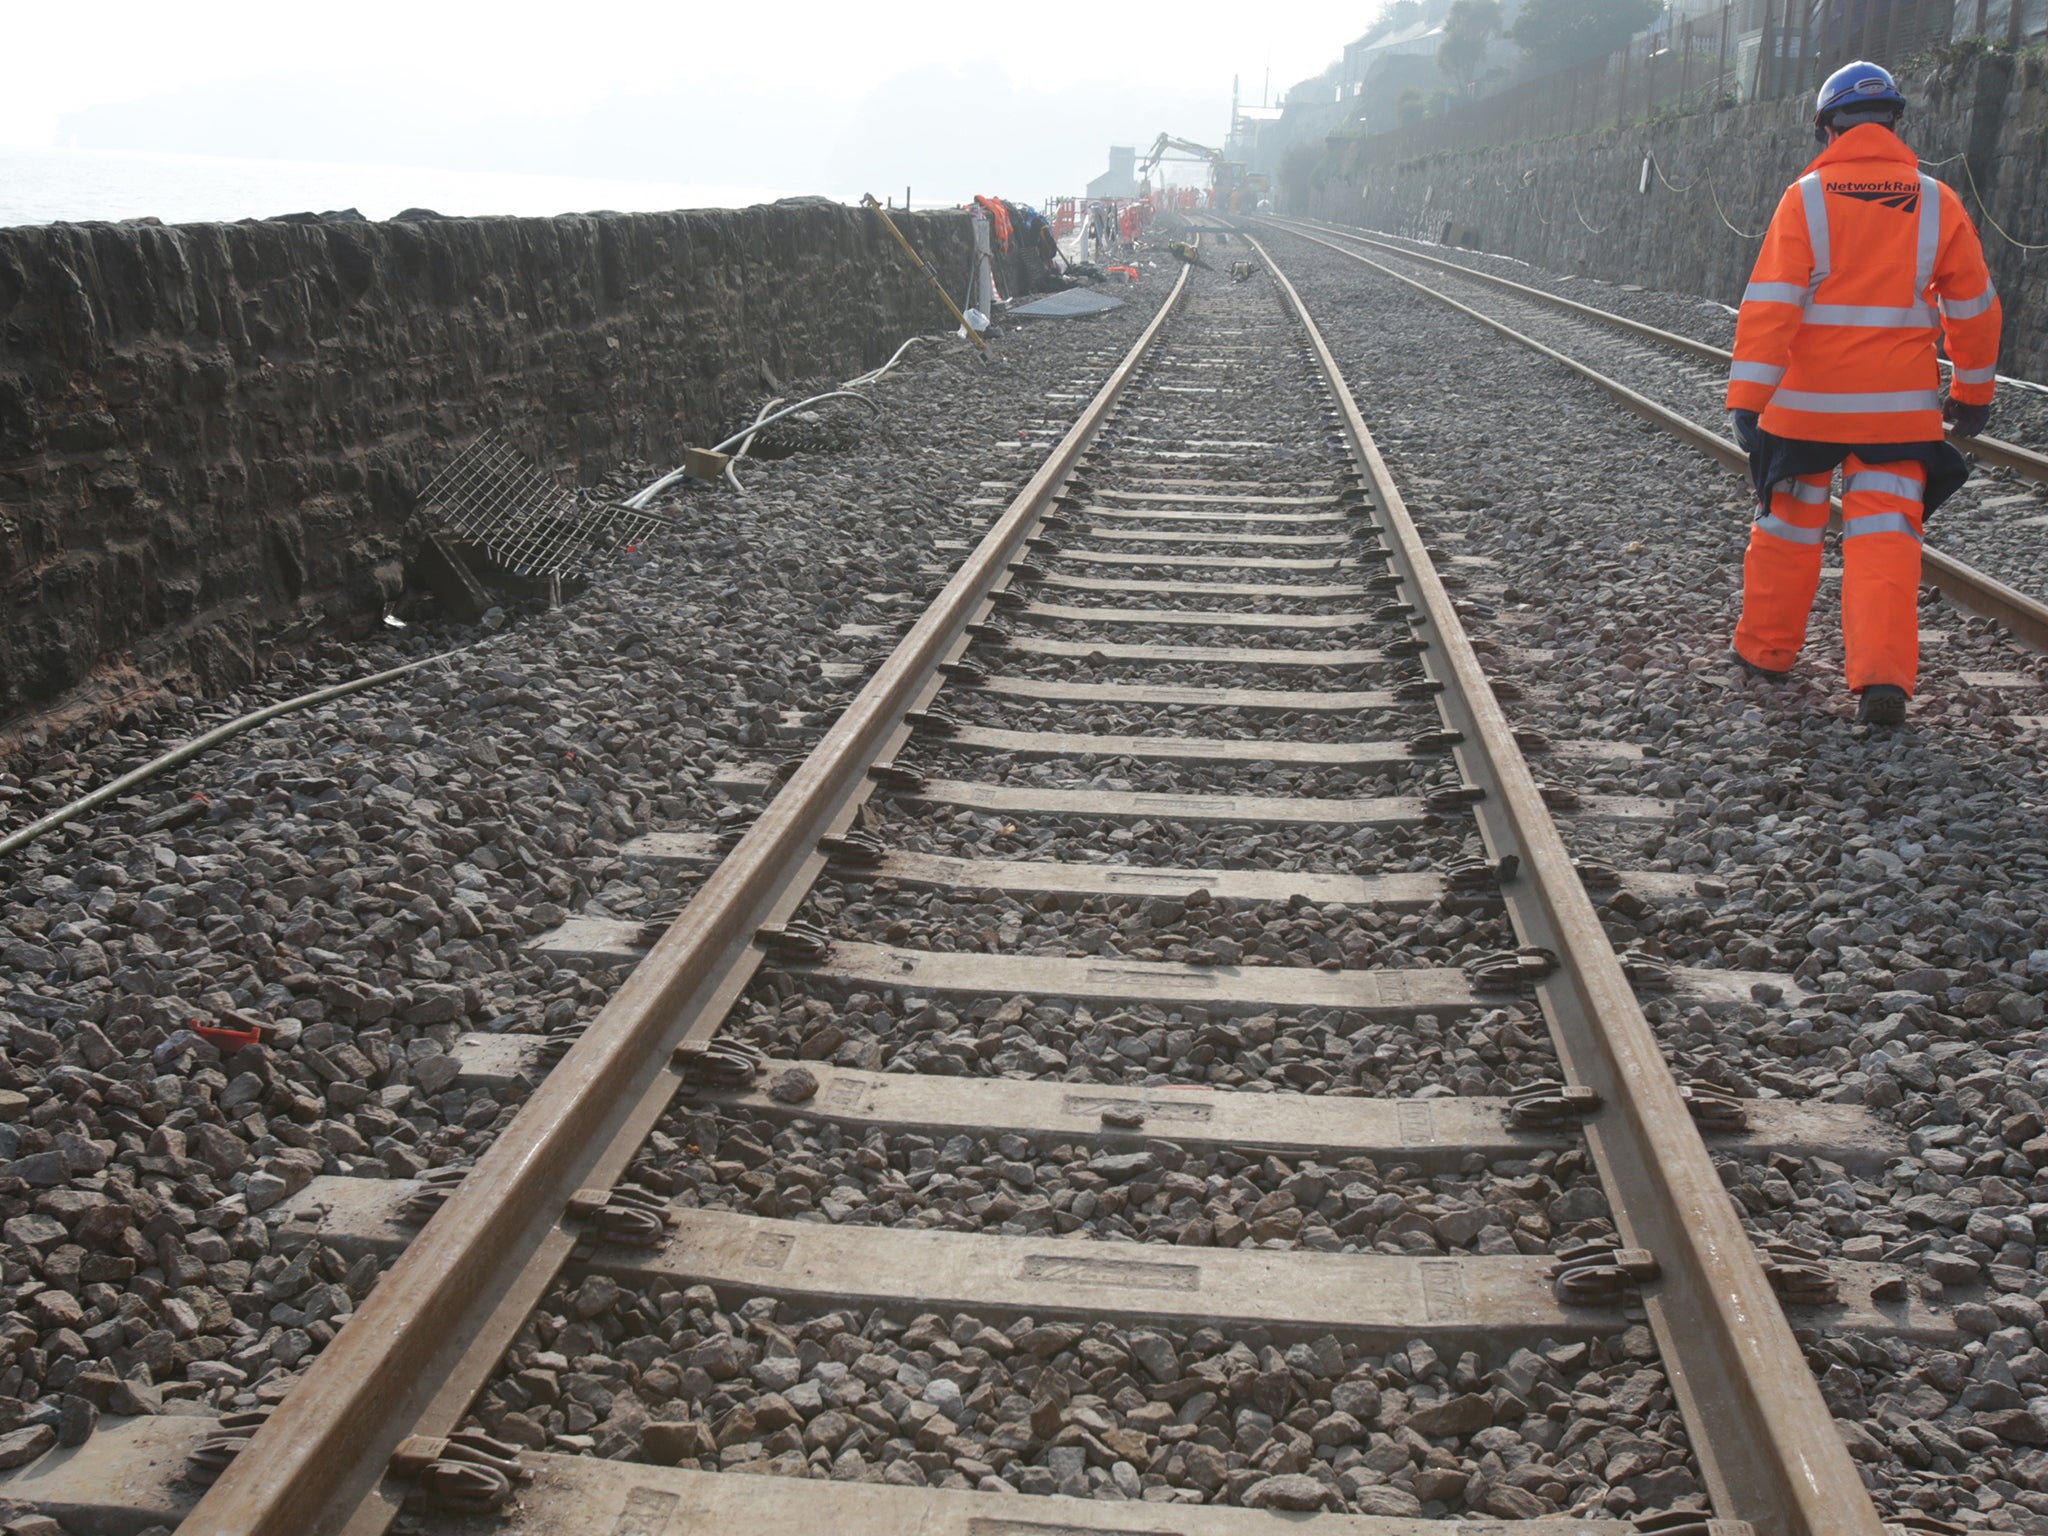 Labour fears ‘return to the bad old days of Railtrack’ if companies with a ‘cavalier attitude’ to safety are handed control of tracks